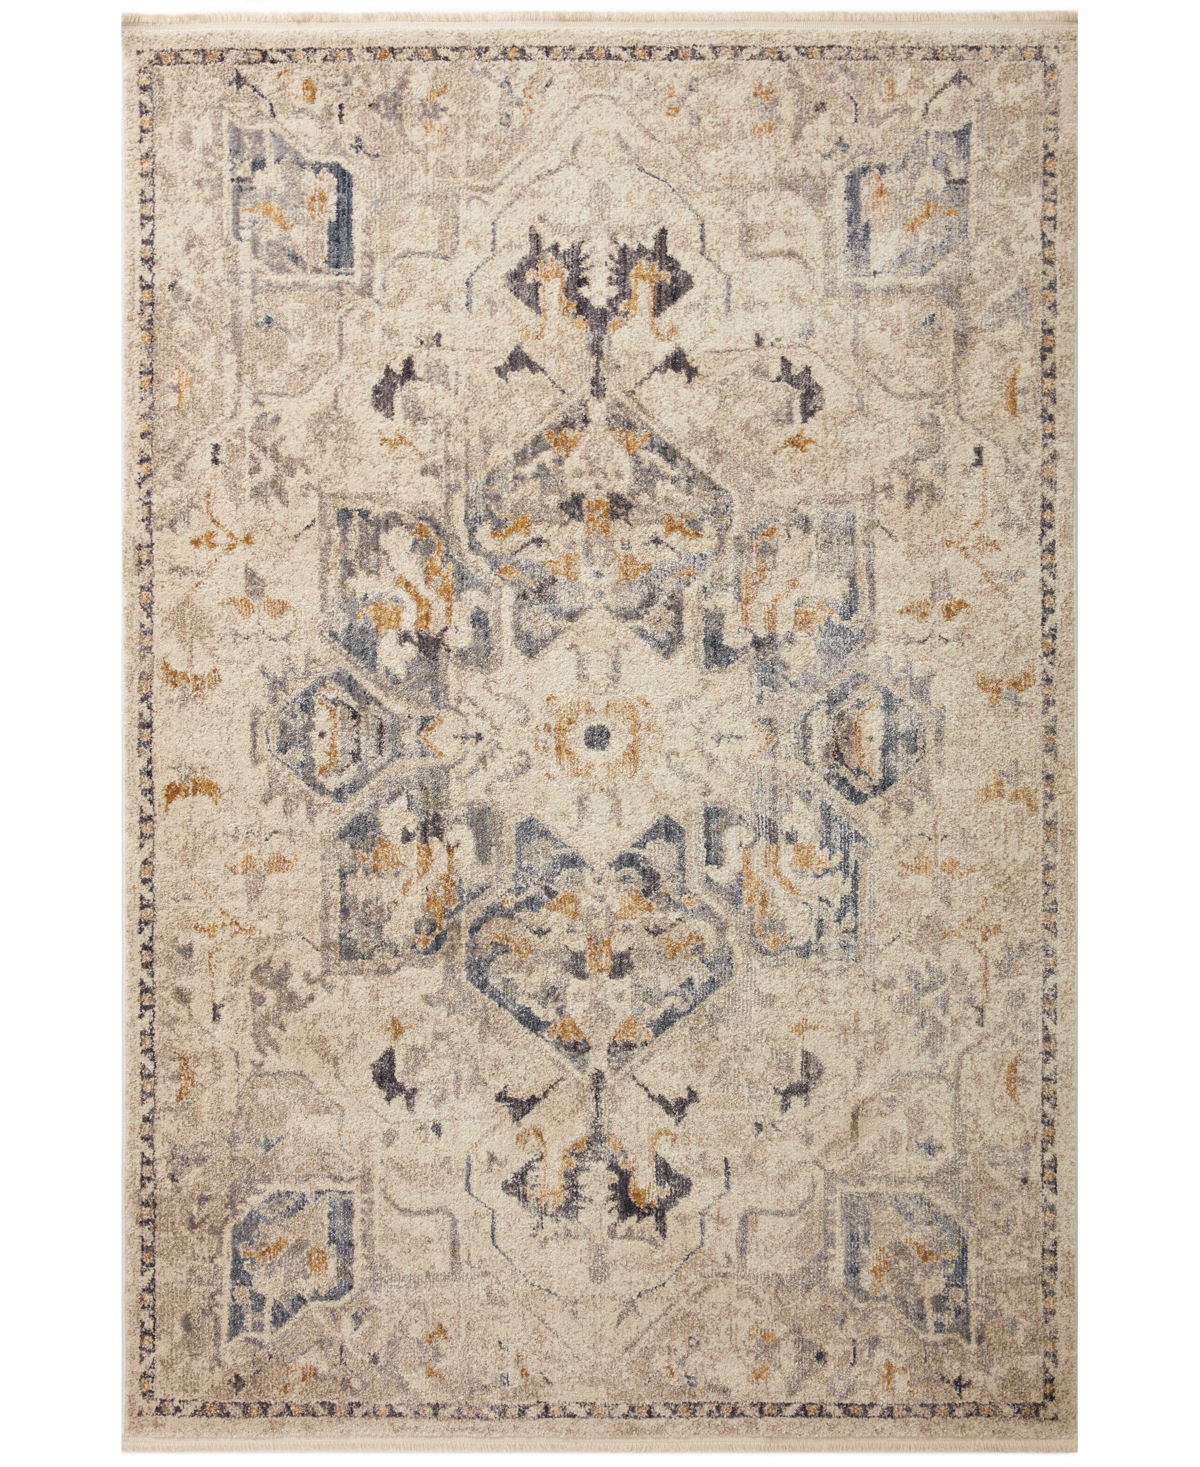 Magnolia Home By Joanna Gaines X Loloi Janey Jay-01 6'7" X 9'2" Area Rug In Beige